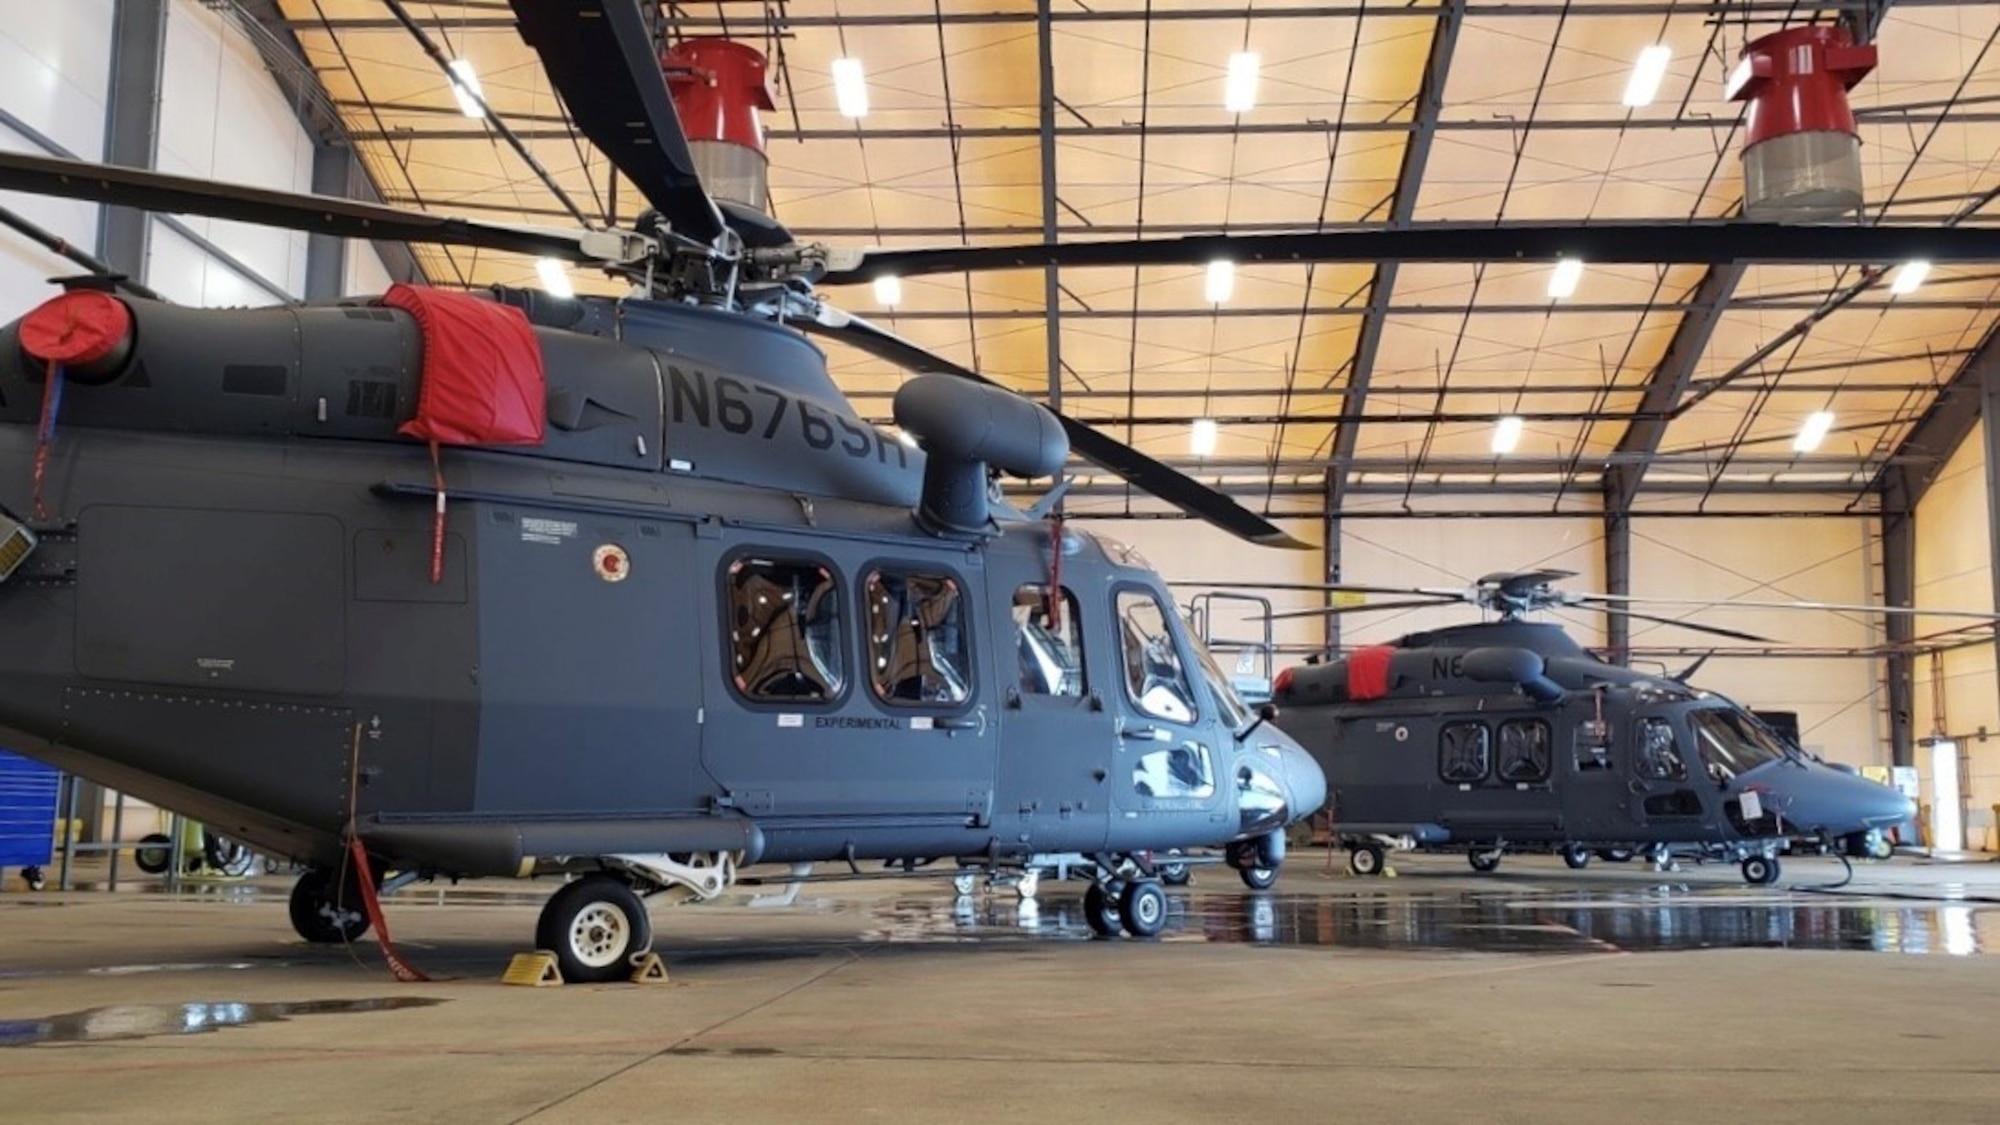 Two of the four newly acquired MH-139A Grey Wolf Helicopters pictured at Duke Field, Fla. poised to begin developmental testing as the program marks significant progress towards Milestone C.  The aircraft is set to replace the U.S Airforce’s UH-1N Huey aircraft fleet. (U.S. Air Force)